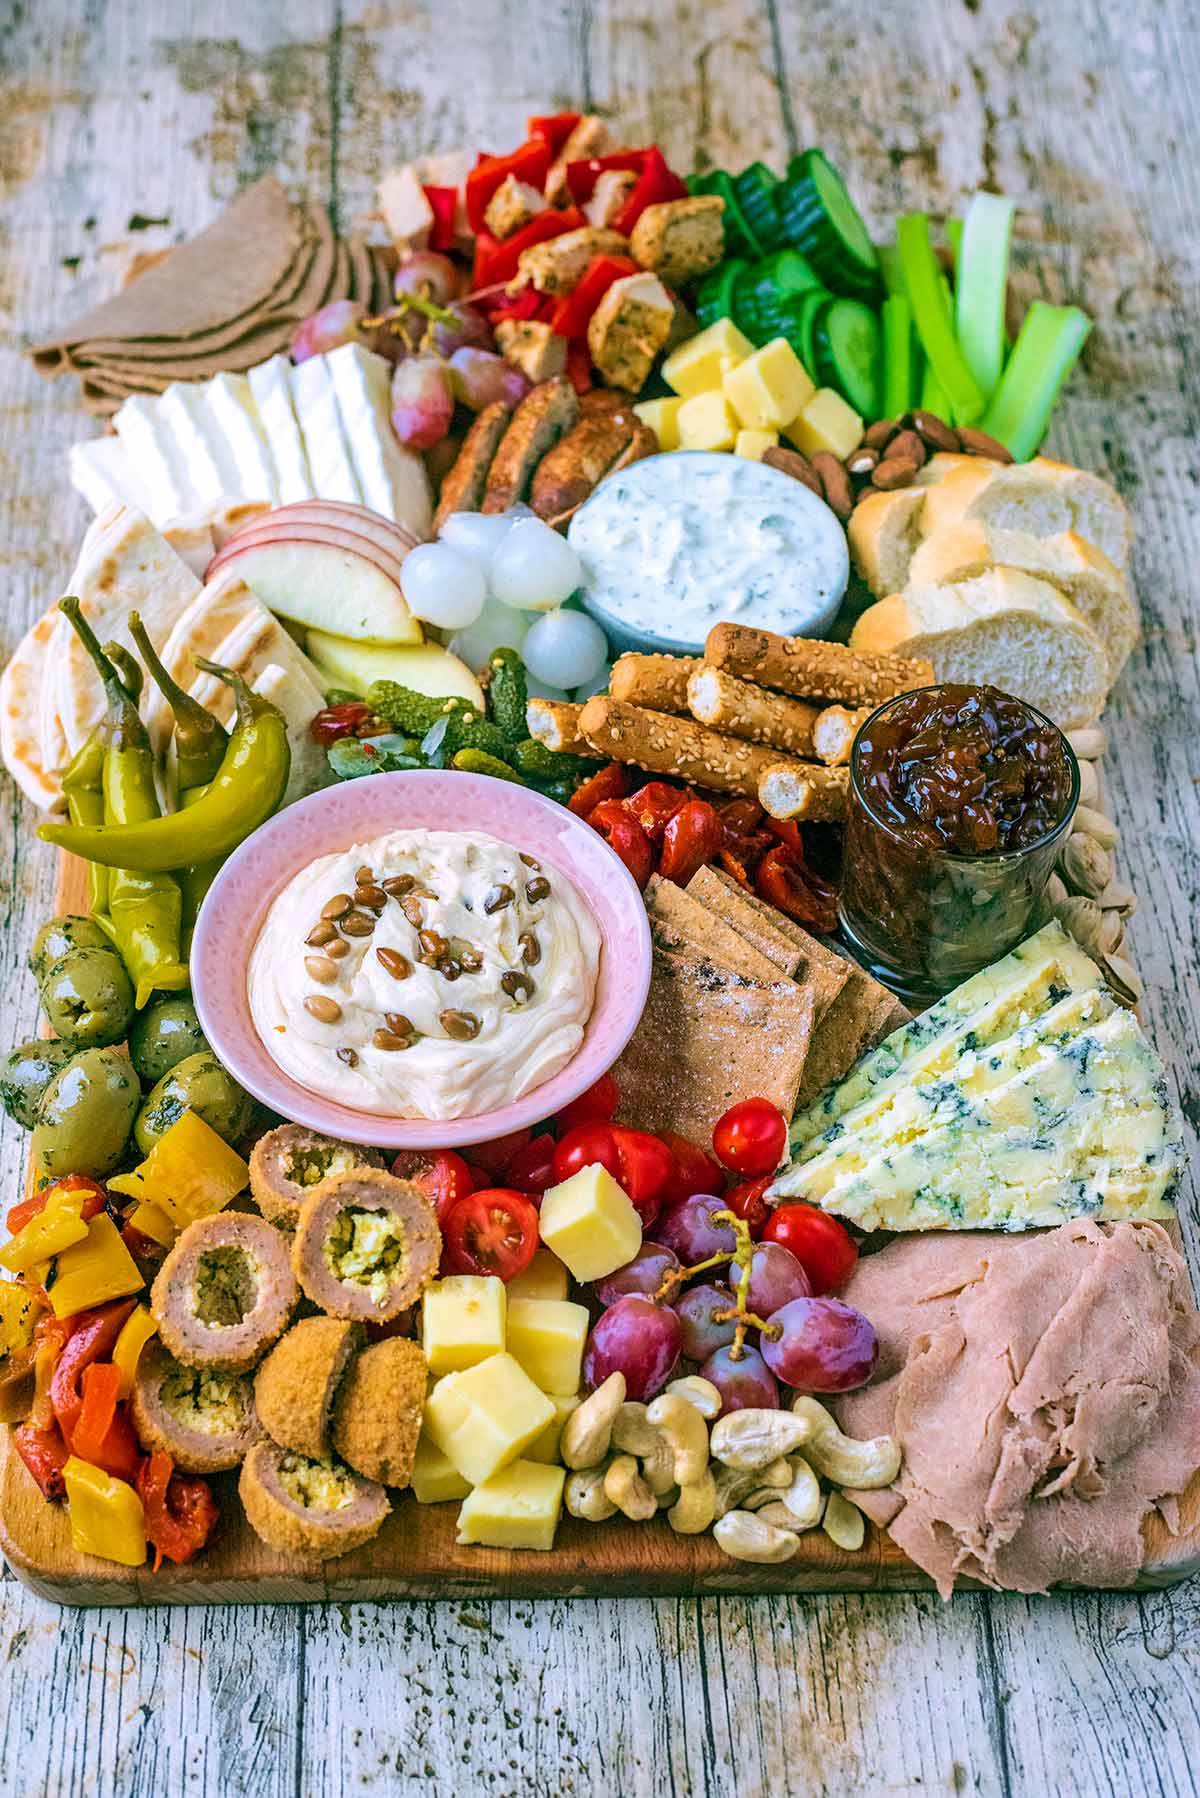 A charcuterie board containing meats, dips, cheeses, vegetables and bread.